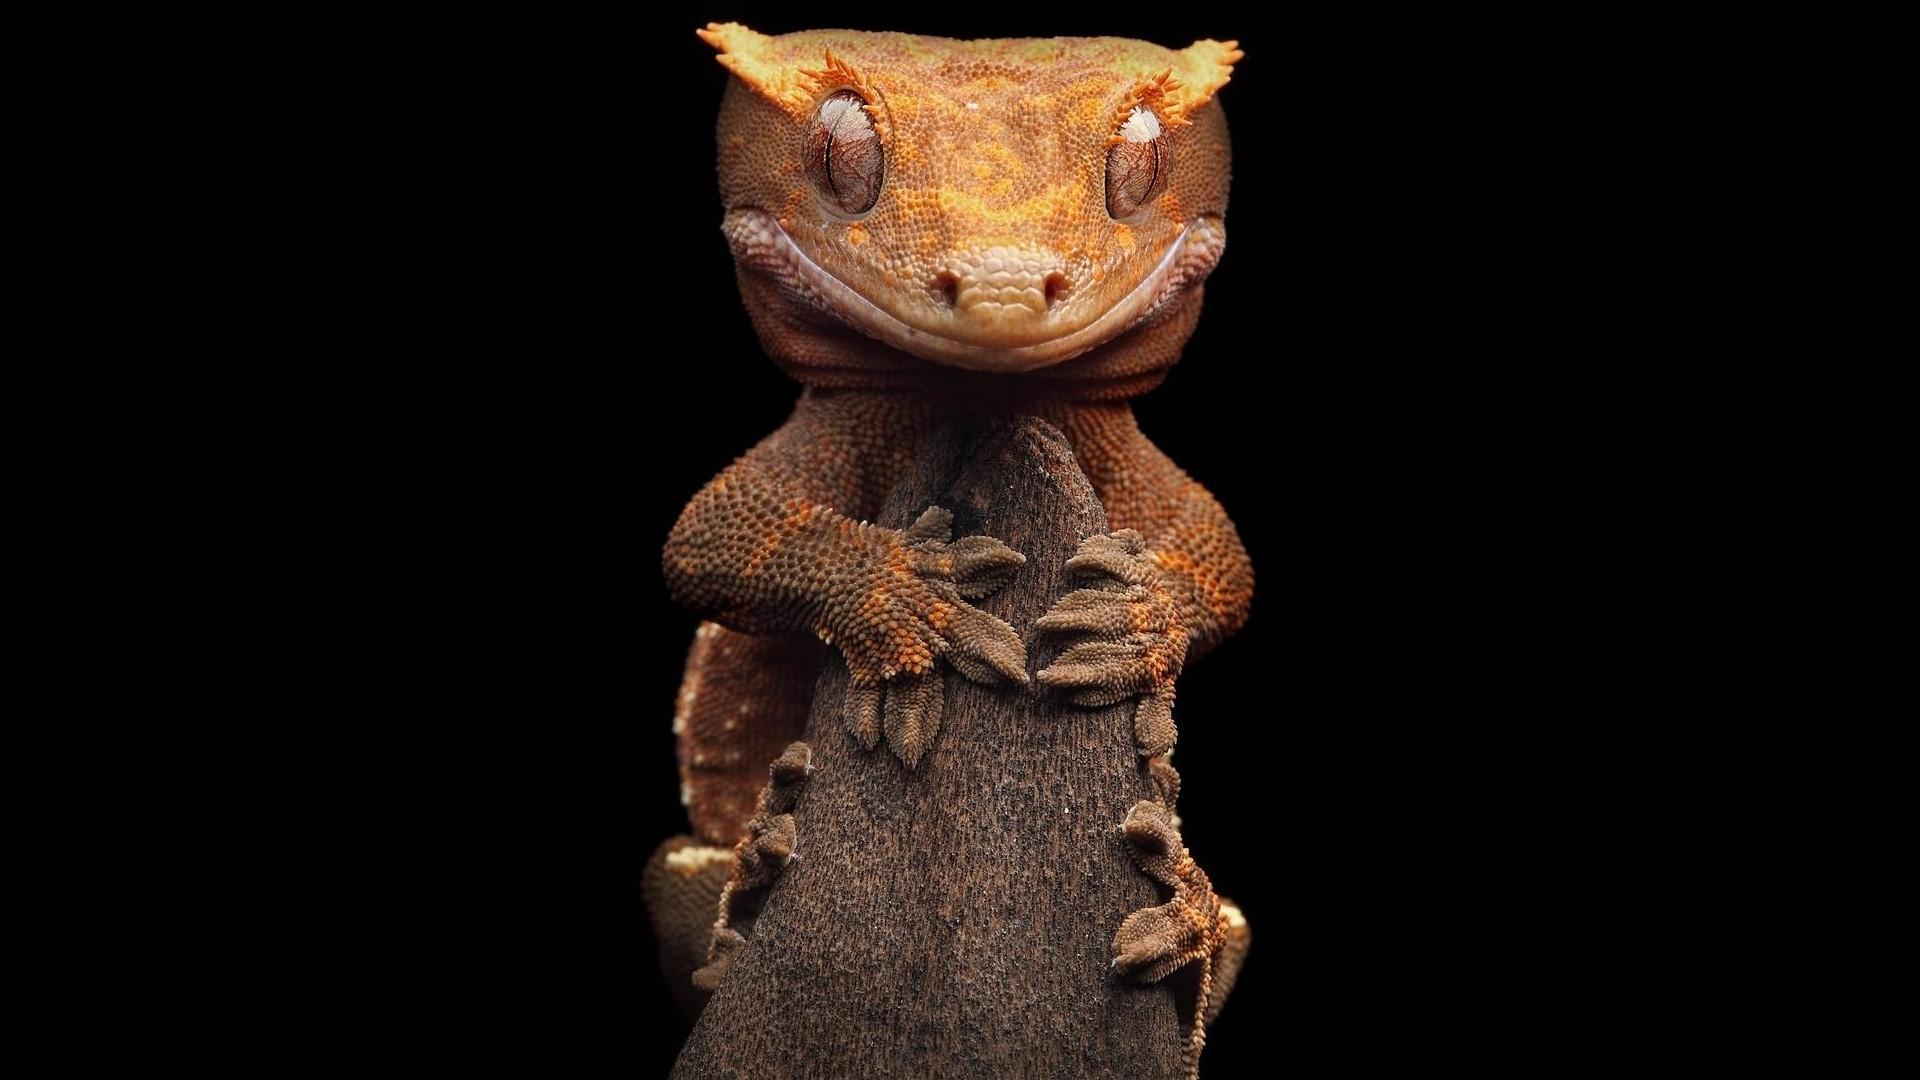 Crested Gecko Wallpapers Top Free Crested Gecko Backgrounds